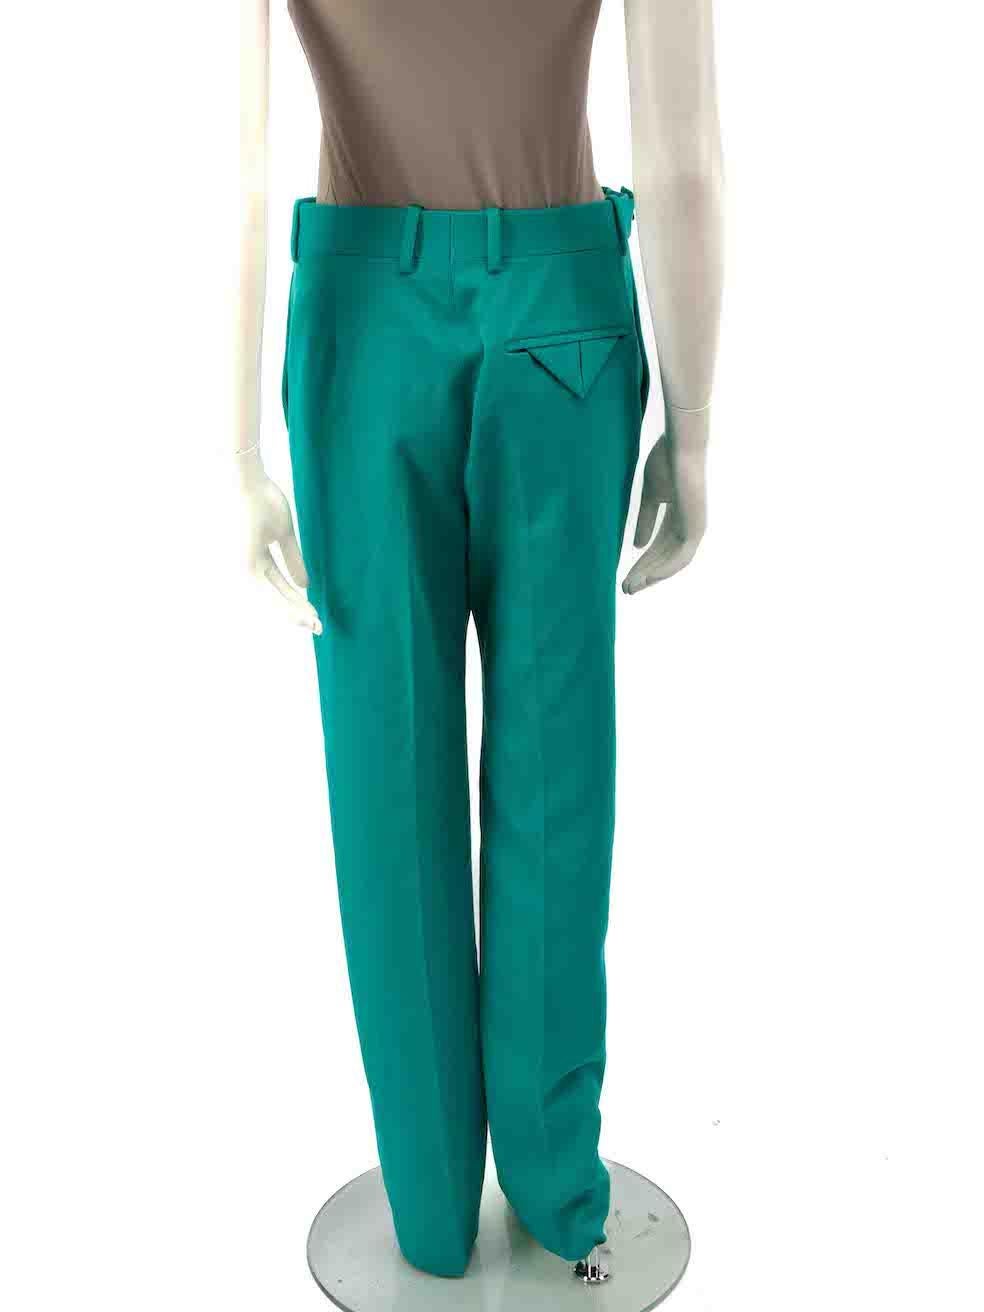 Bottega Veneta Turquoise Straight Leg Trousers Size XS In Excellent Condition For Sale In London, GB